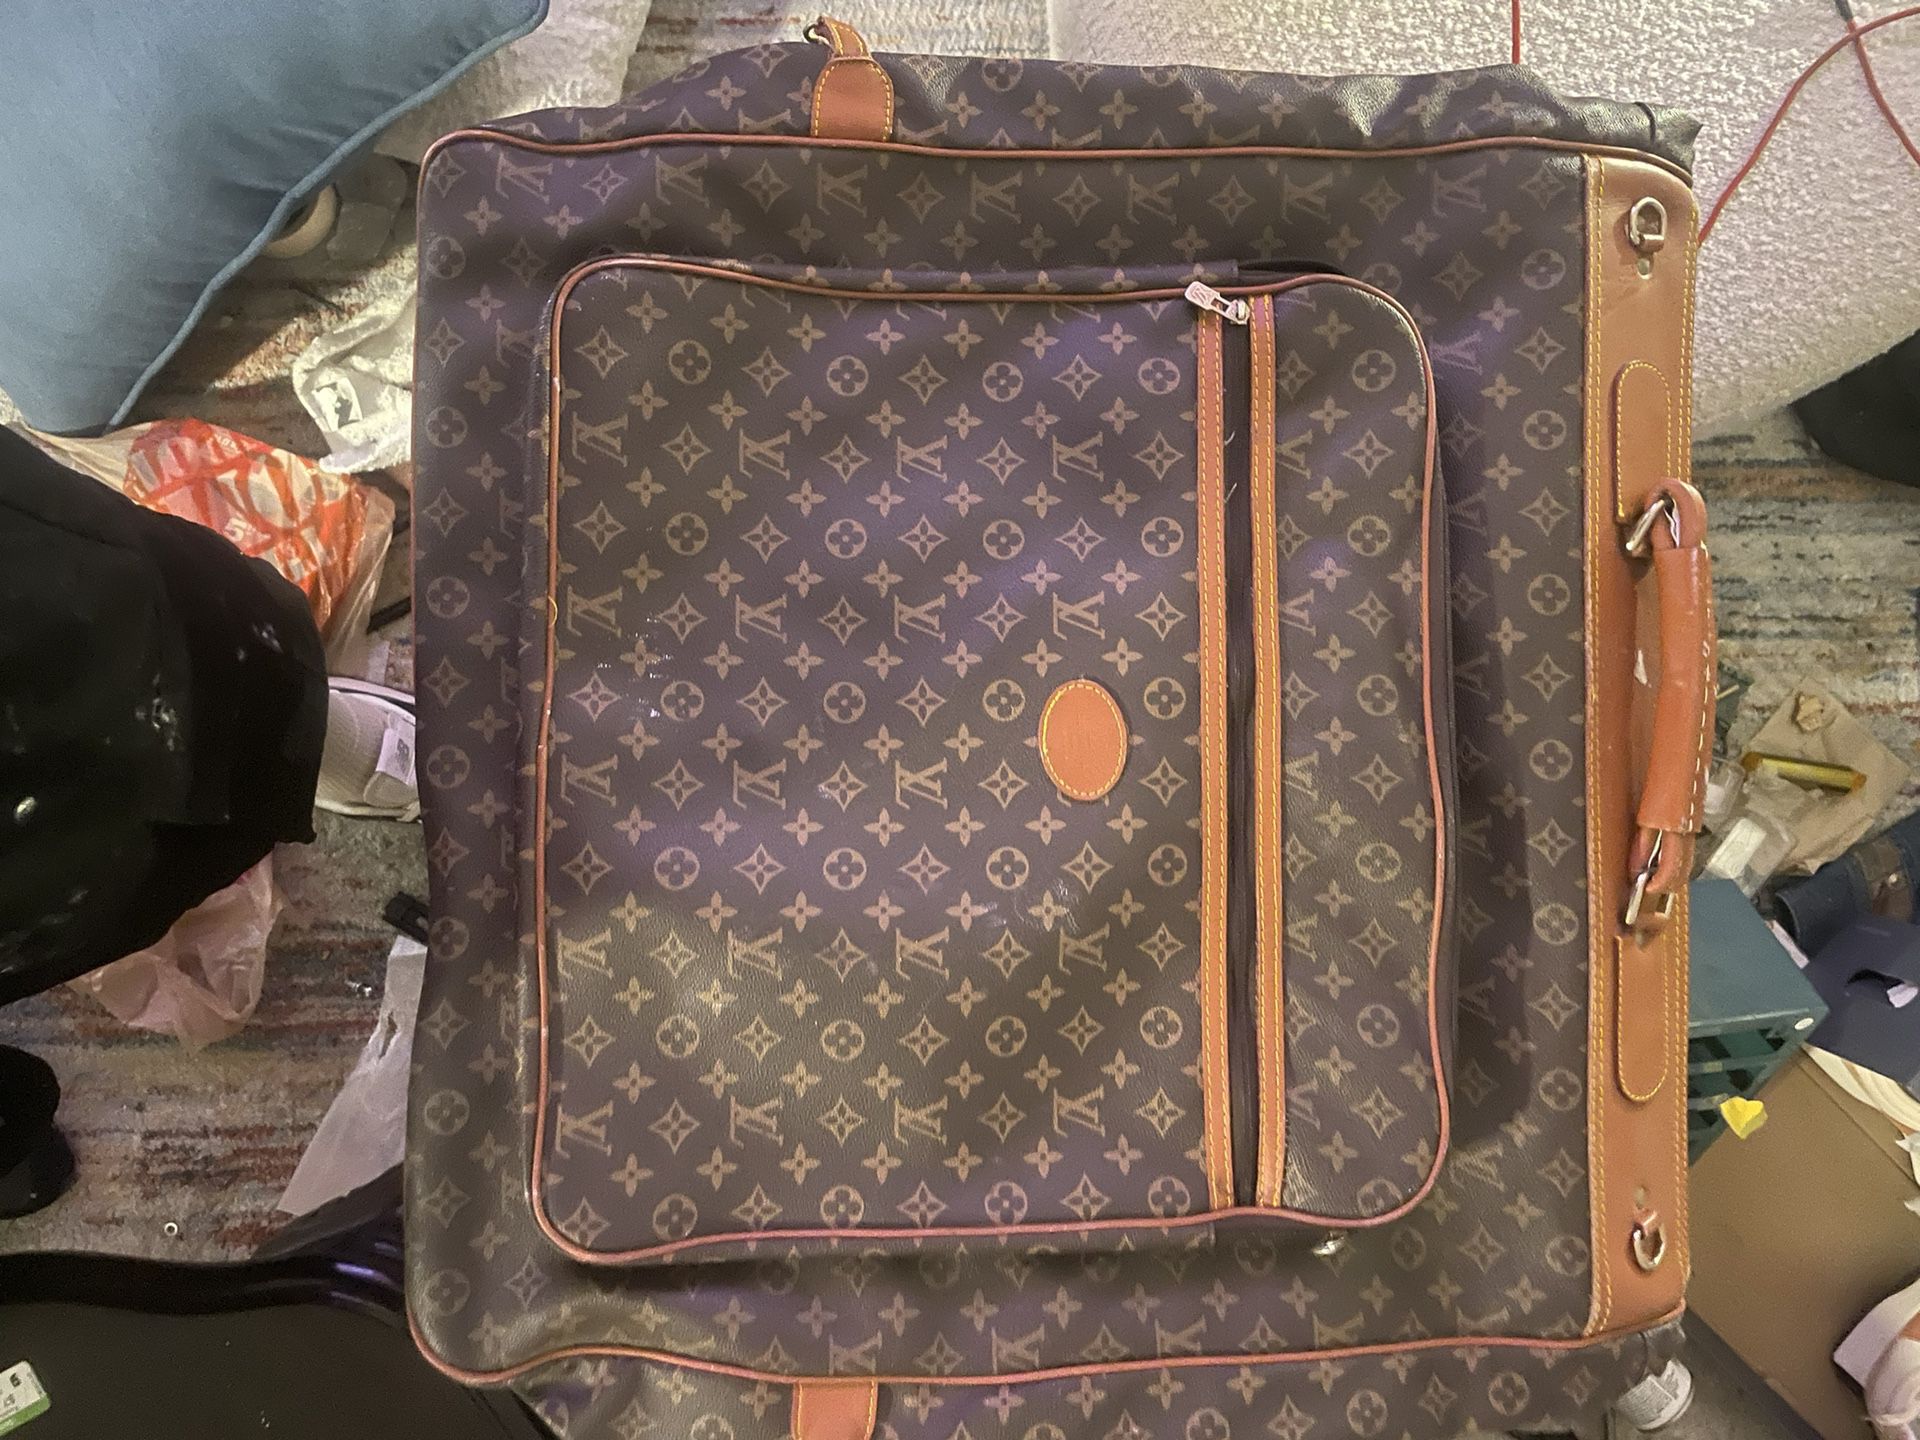 double sided louis vuitton bag